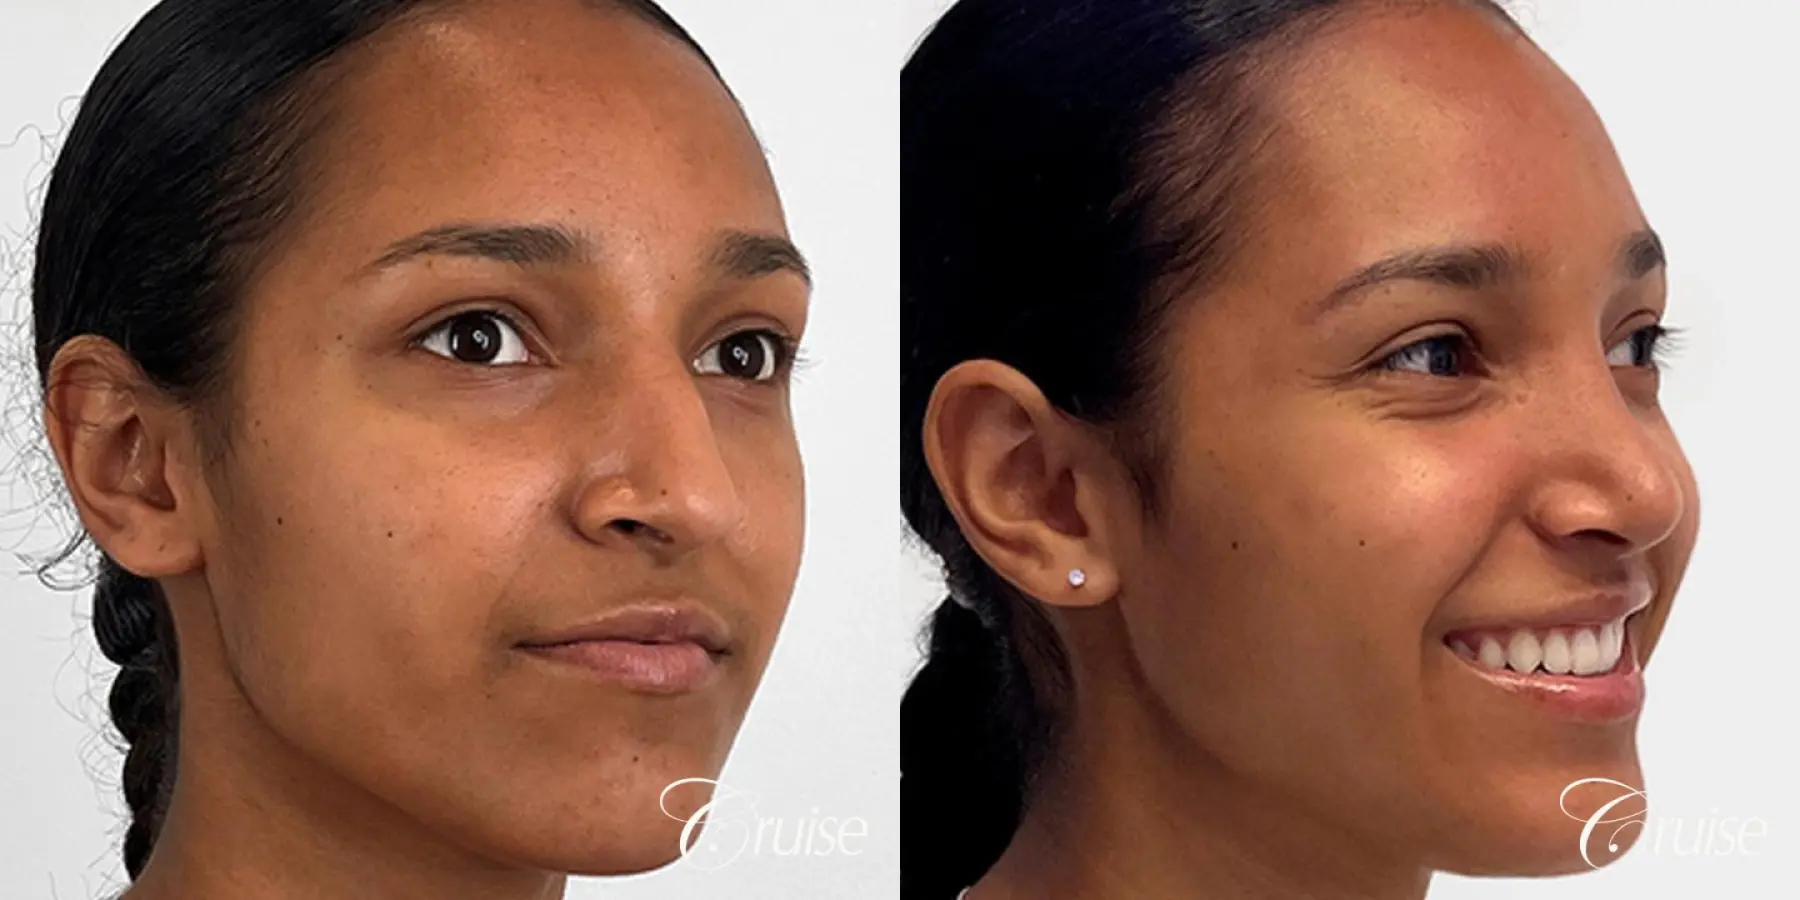 Open Ethnic Rhinoplasty - Before and After 3